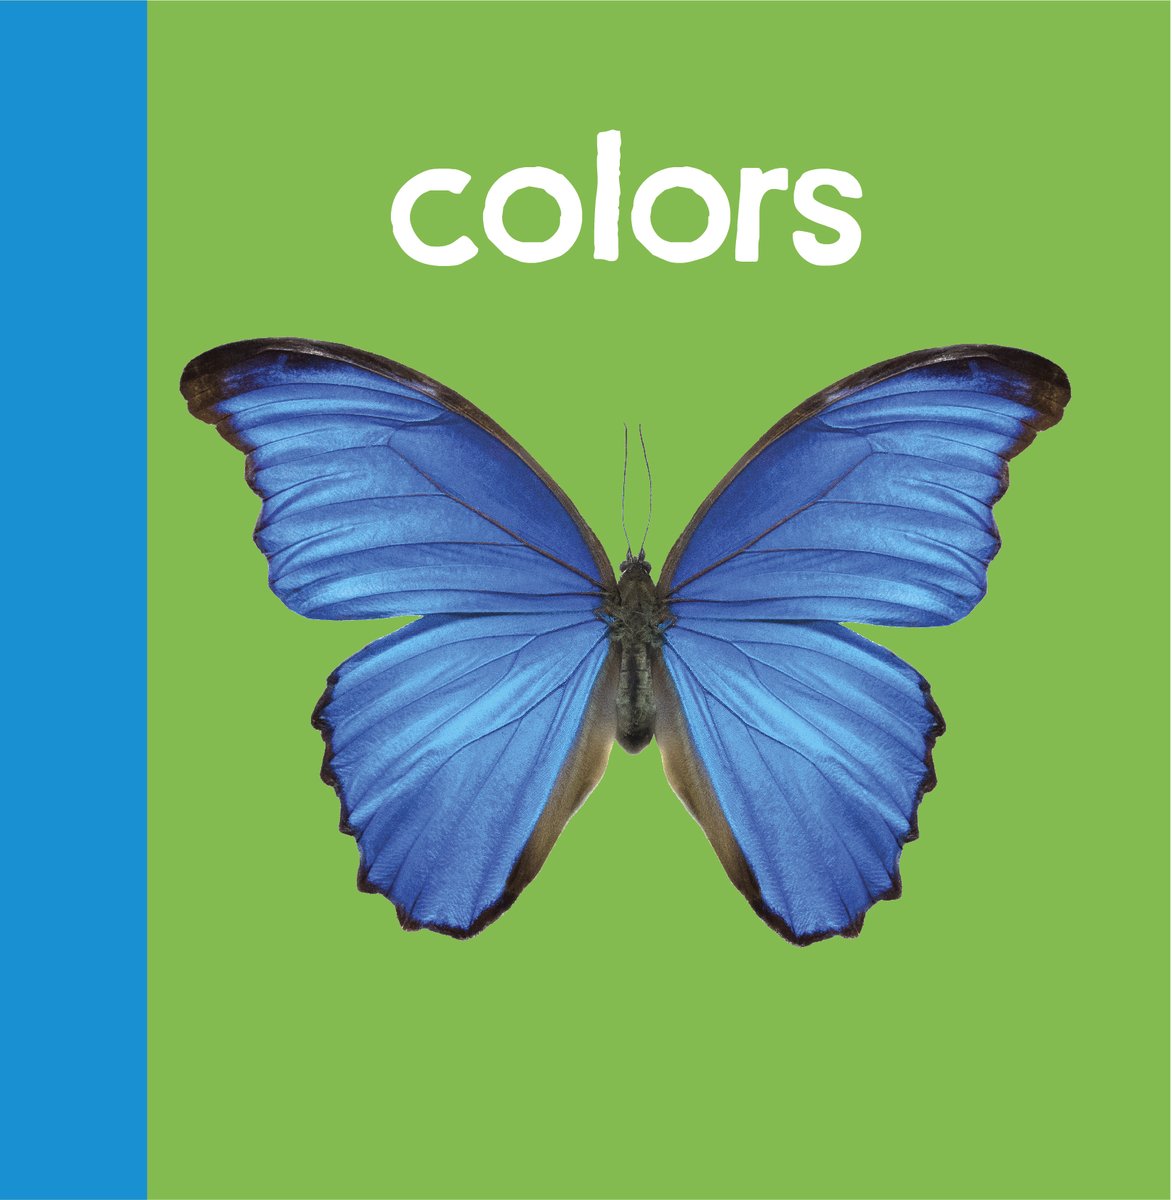 Colors-English-Baby Beginnings